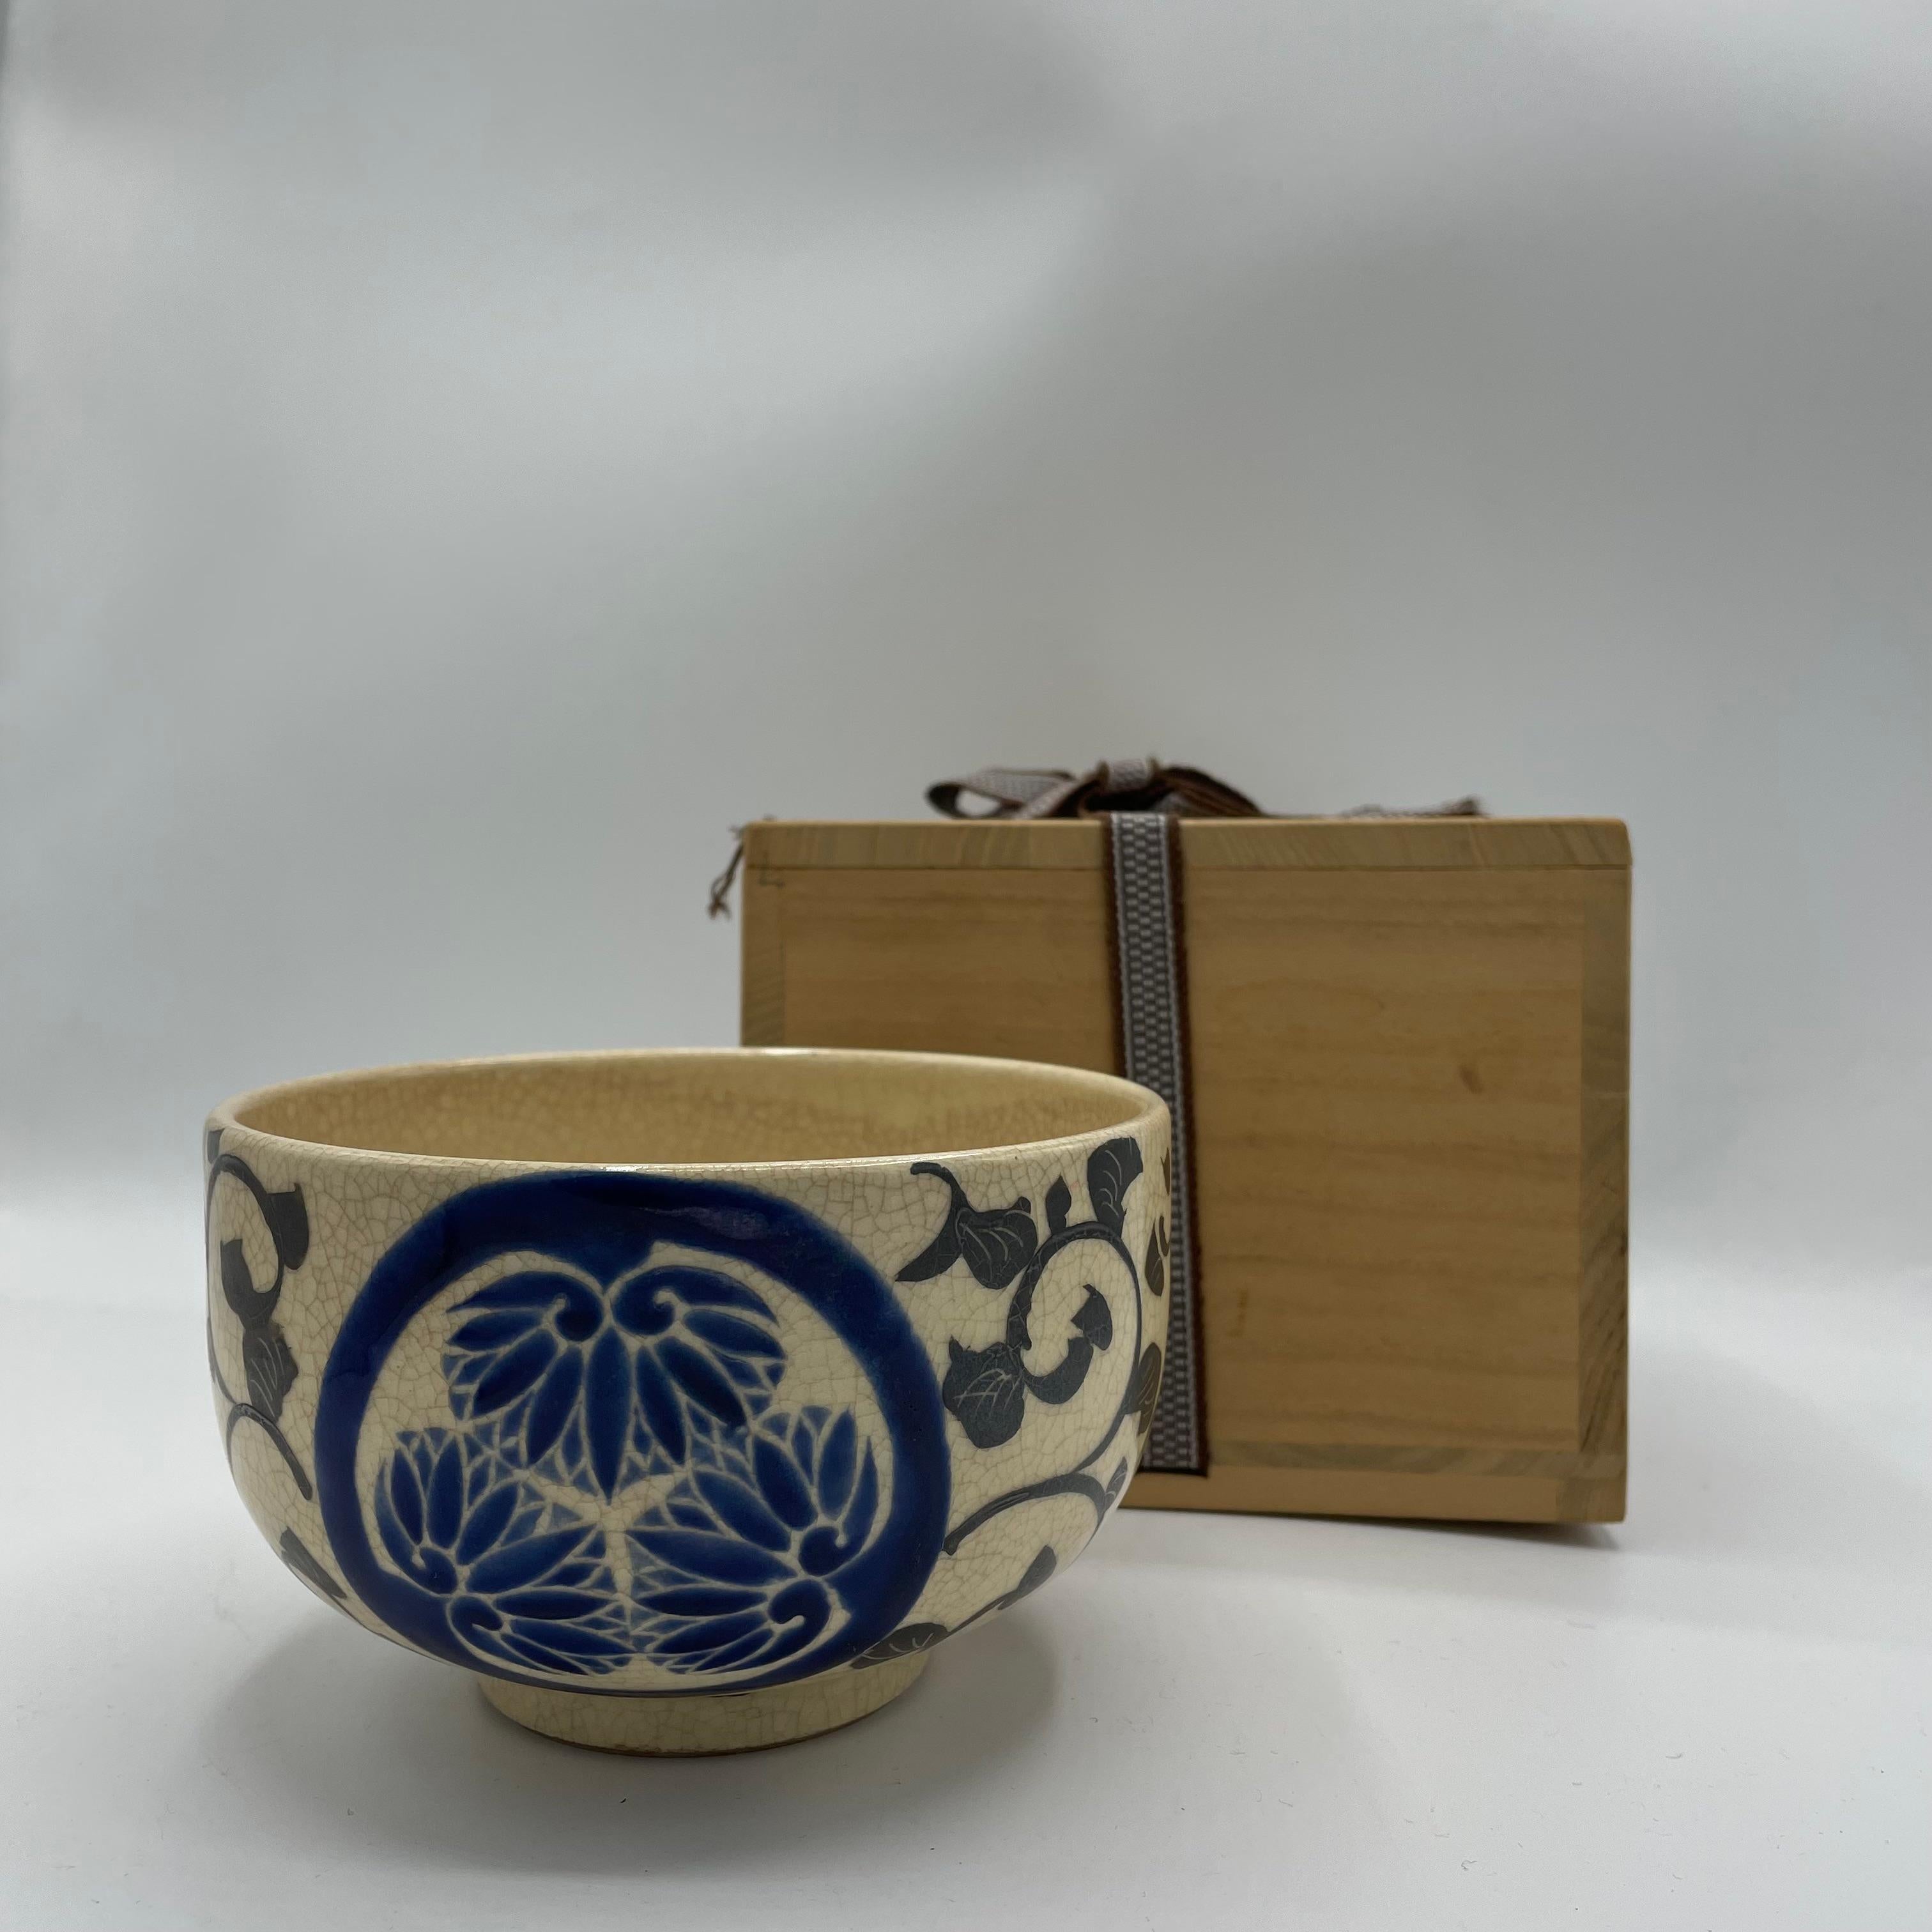 Japanese Antique Matcha Bowl 'Tokugawa' 1960s with Wooden Box For Sale 2